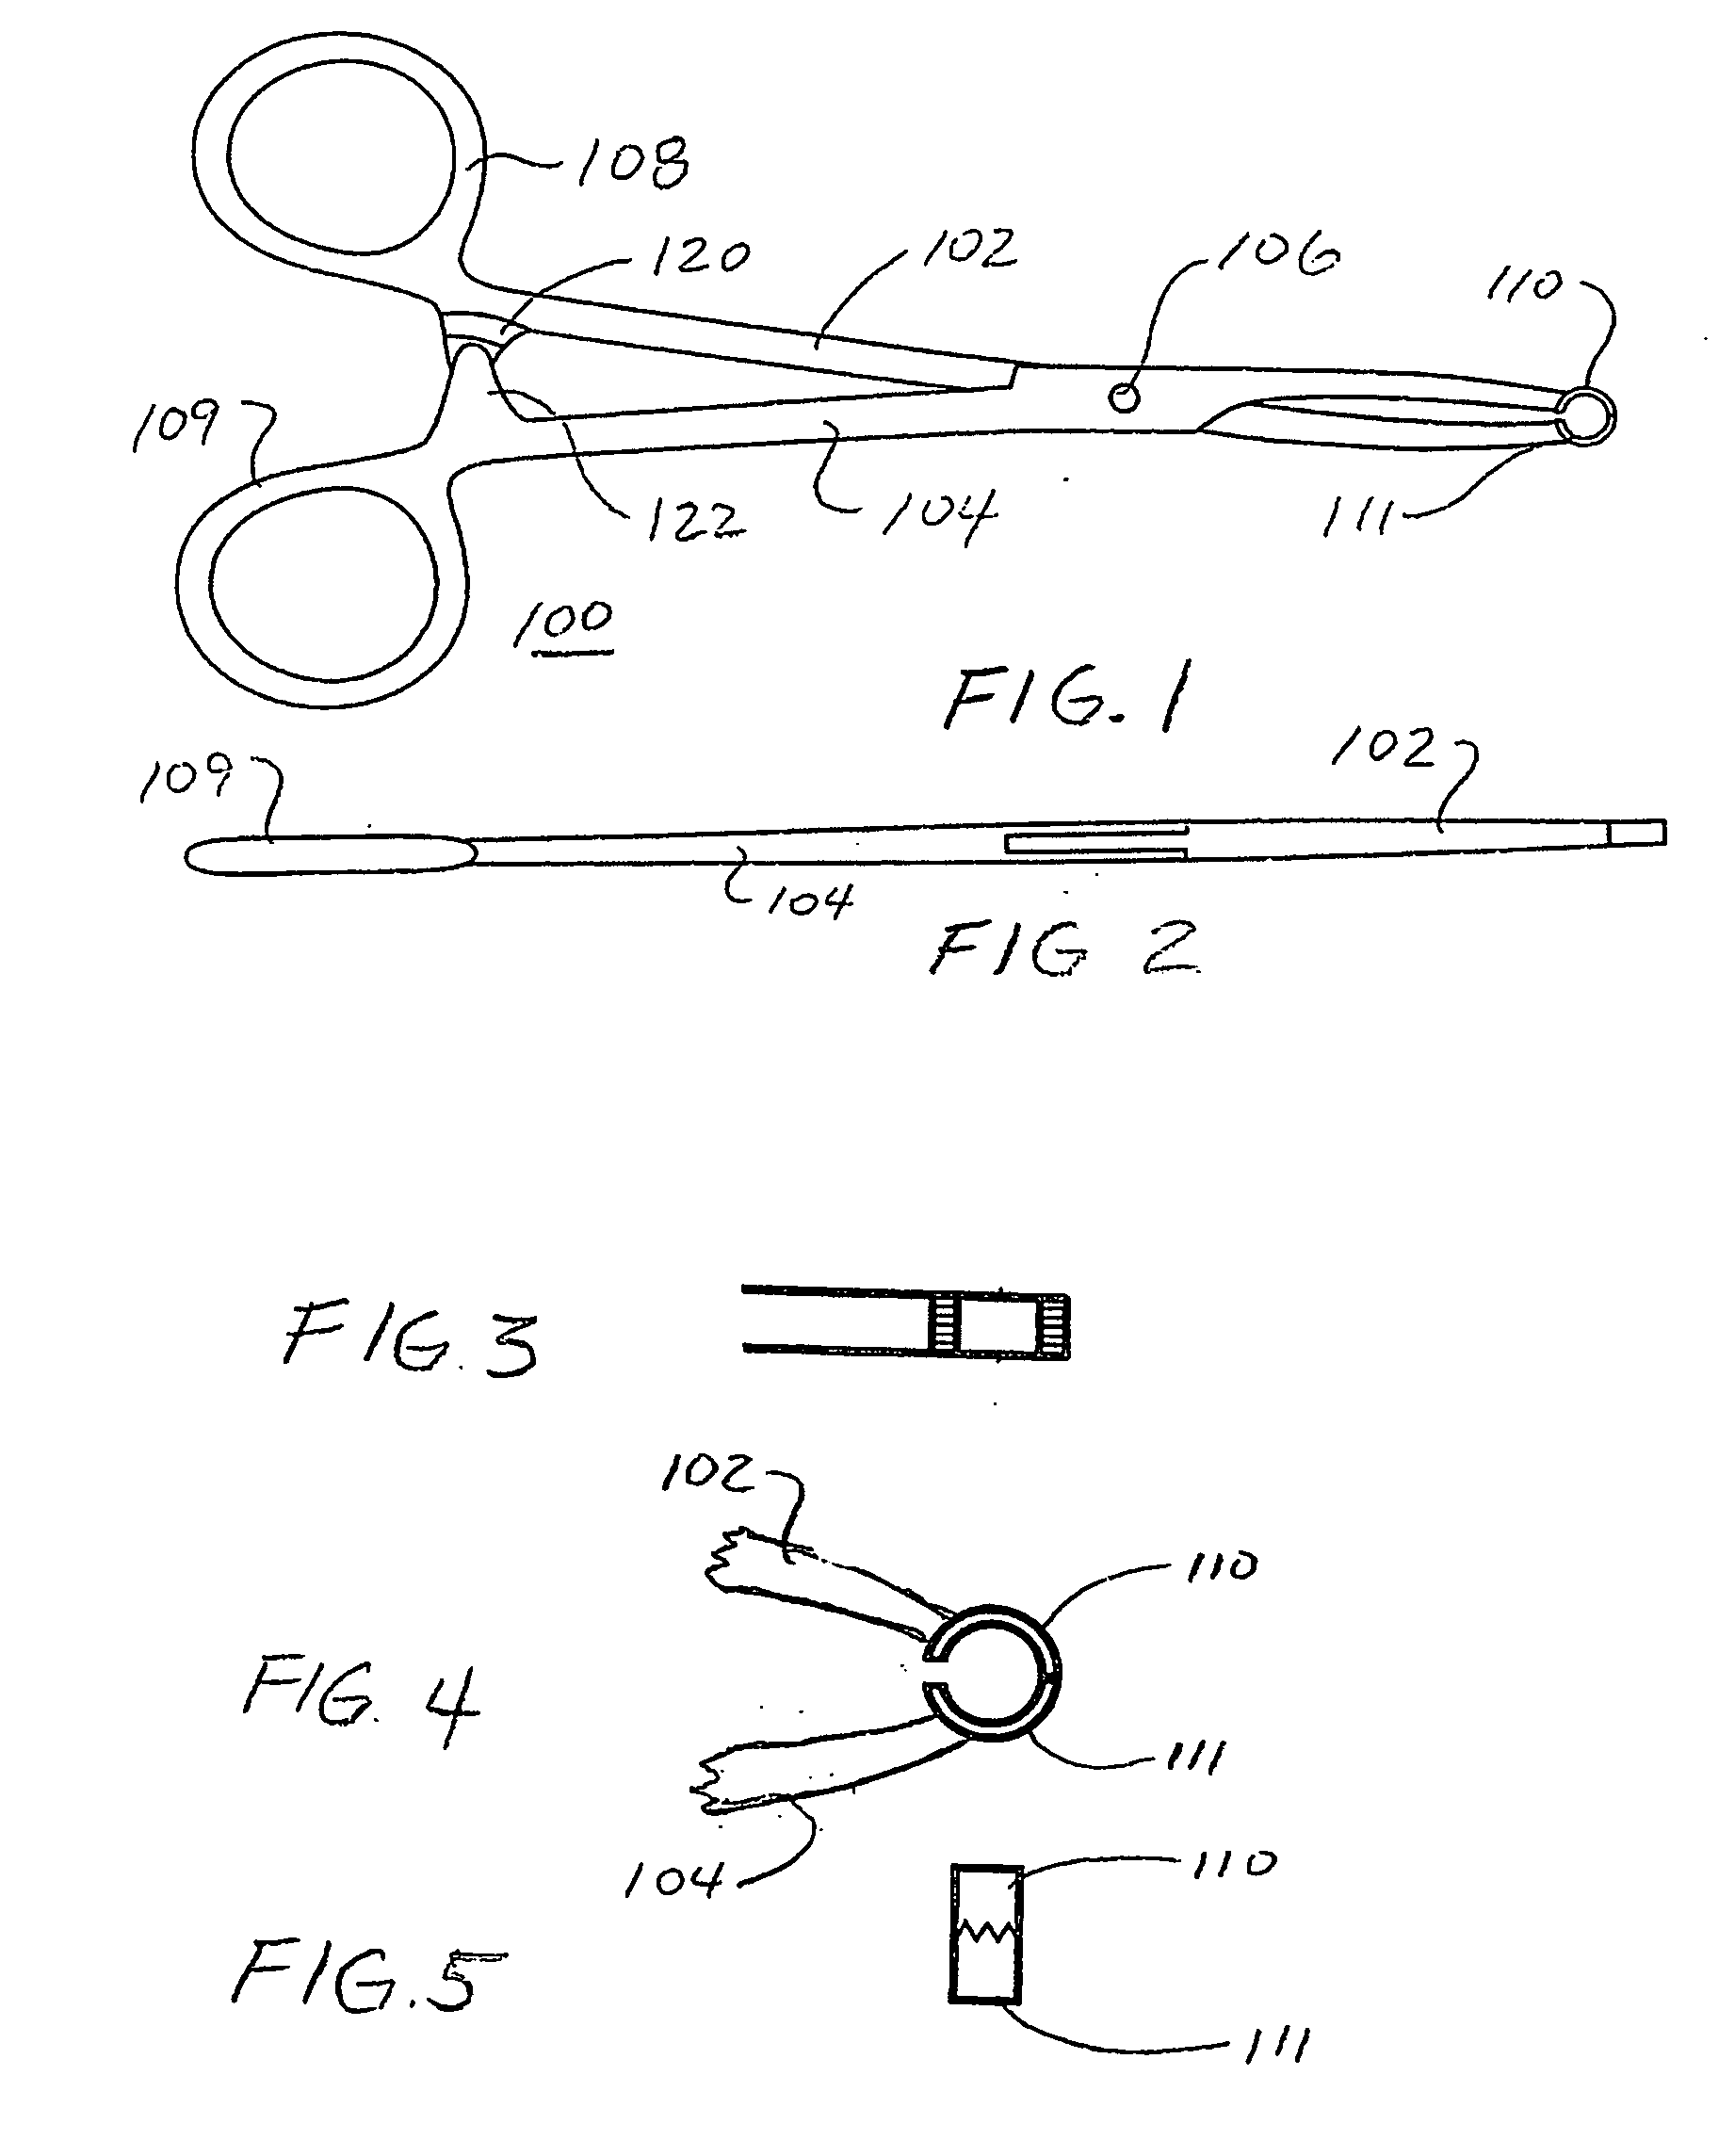 Toothed vasectomy clamps and methods of using same